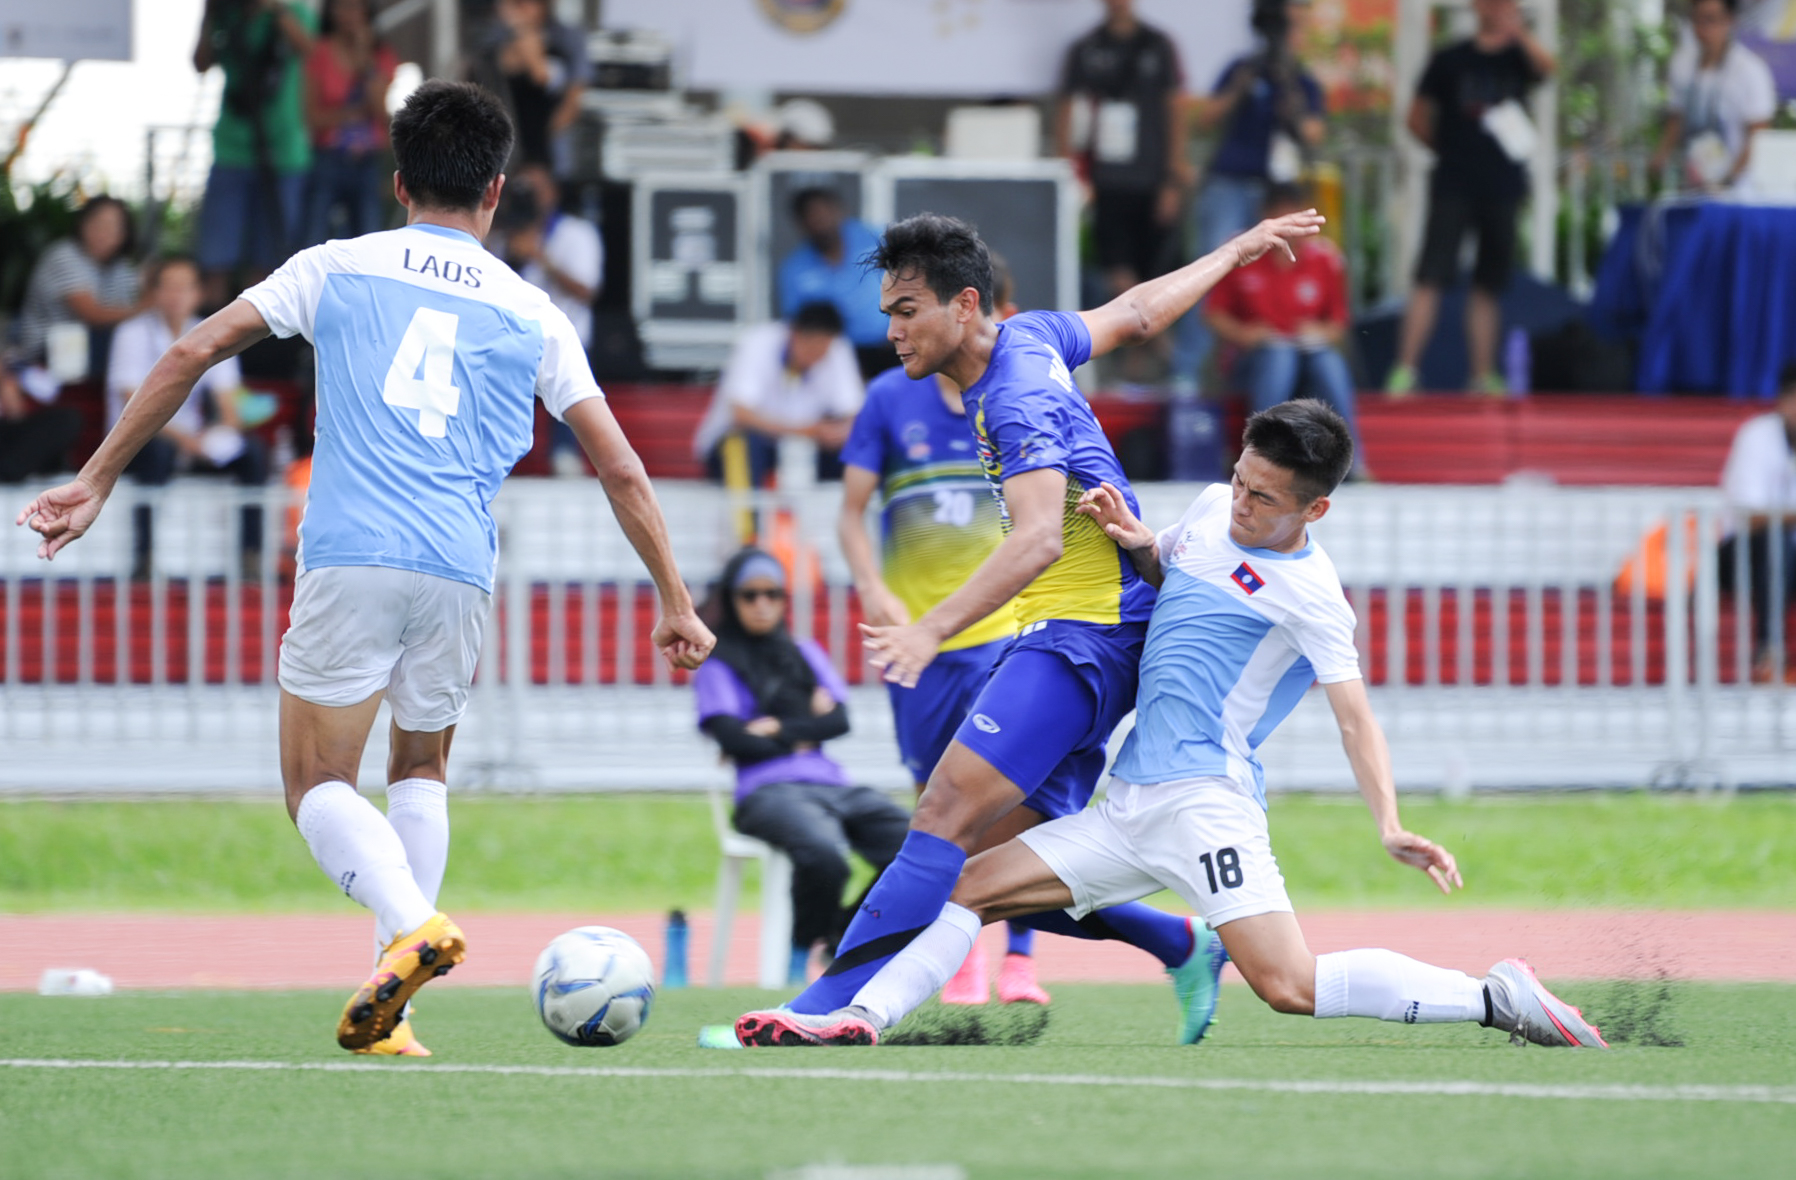 A Laotian player tackles a Thai player during the soccer competition of the ASEAN University Games at the Nanyang Technological University.